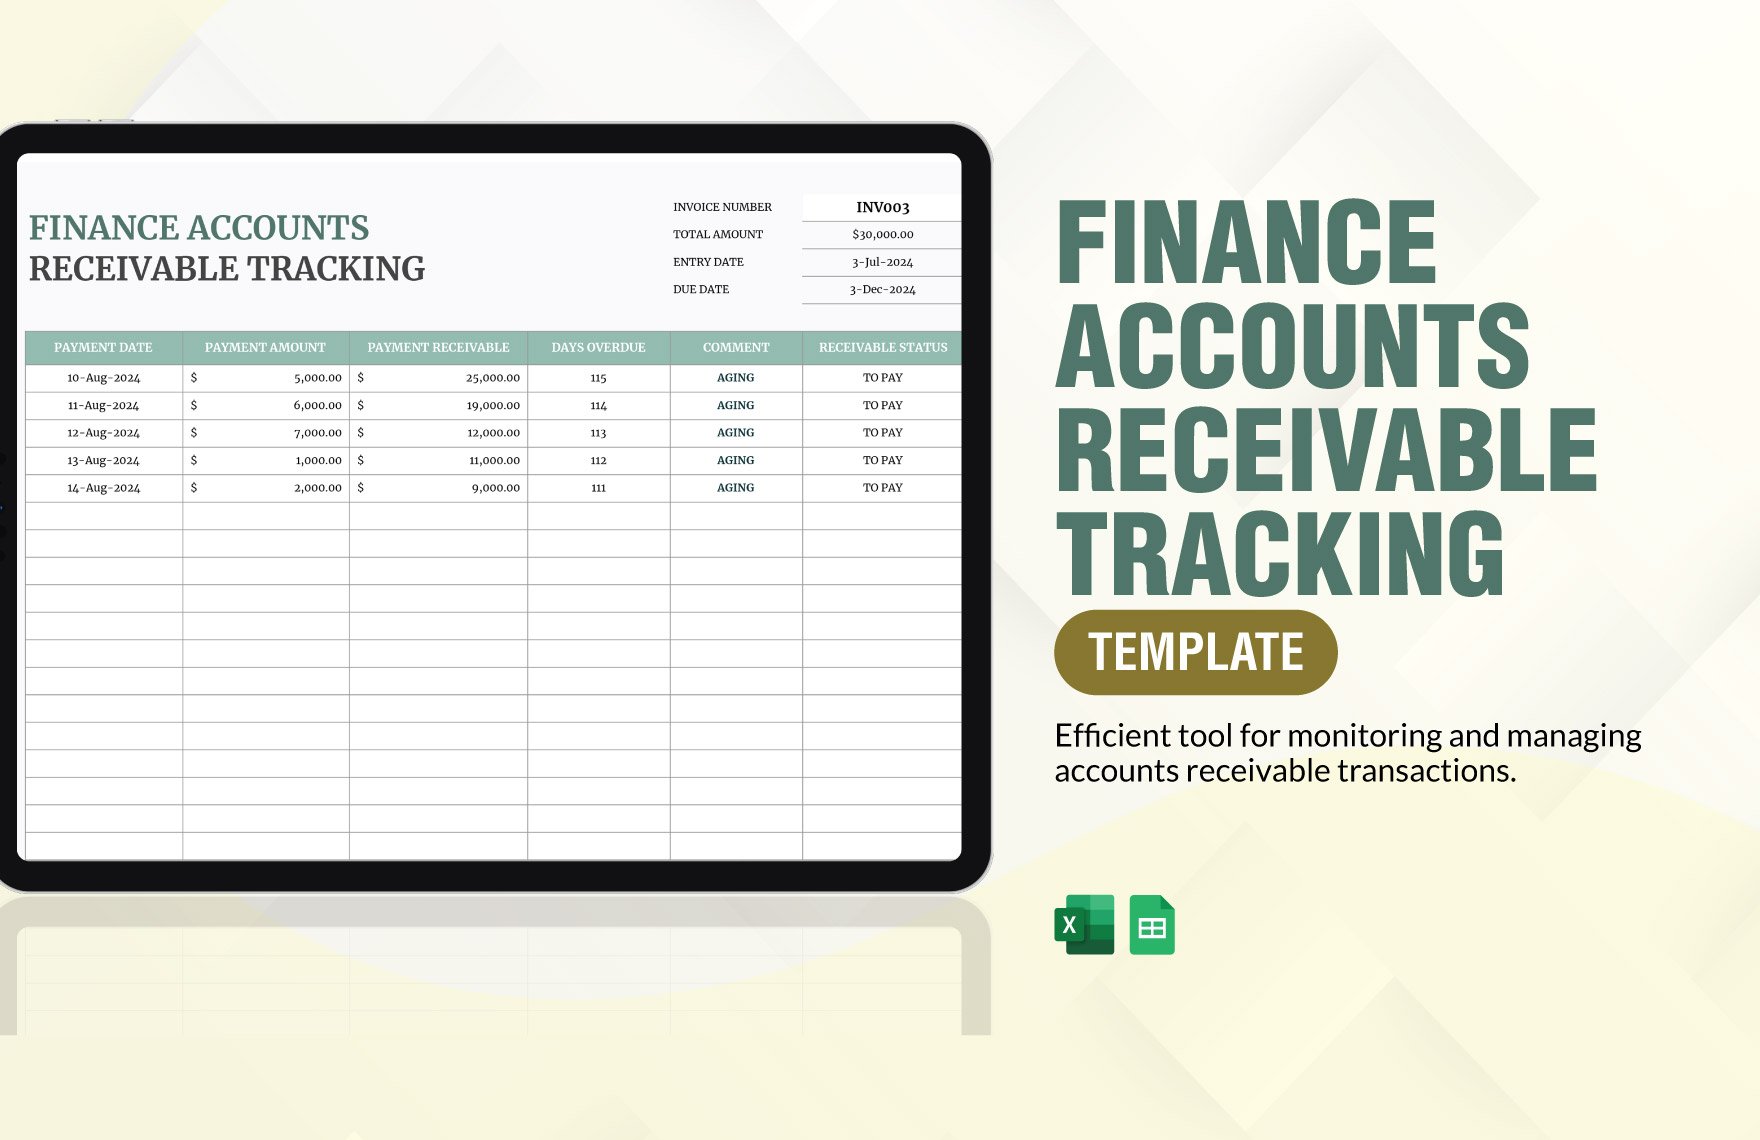 Finance Accounts Receivable Tracking Template in Excel, Google Sheets